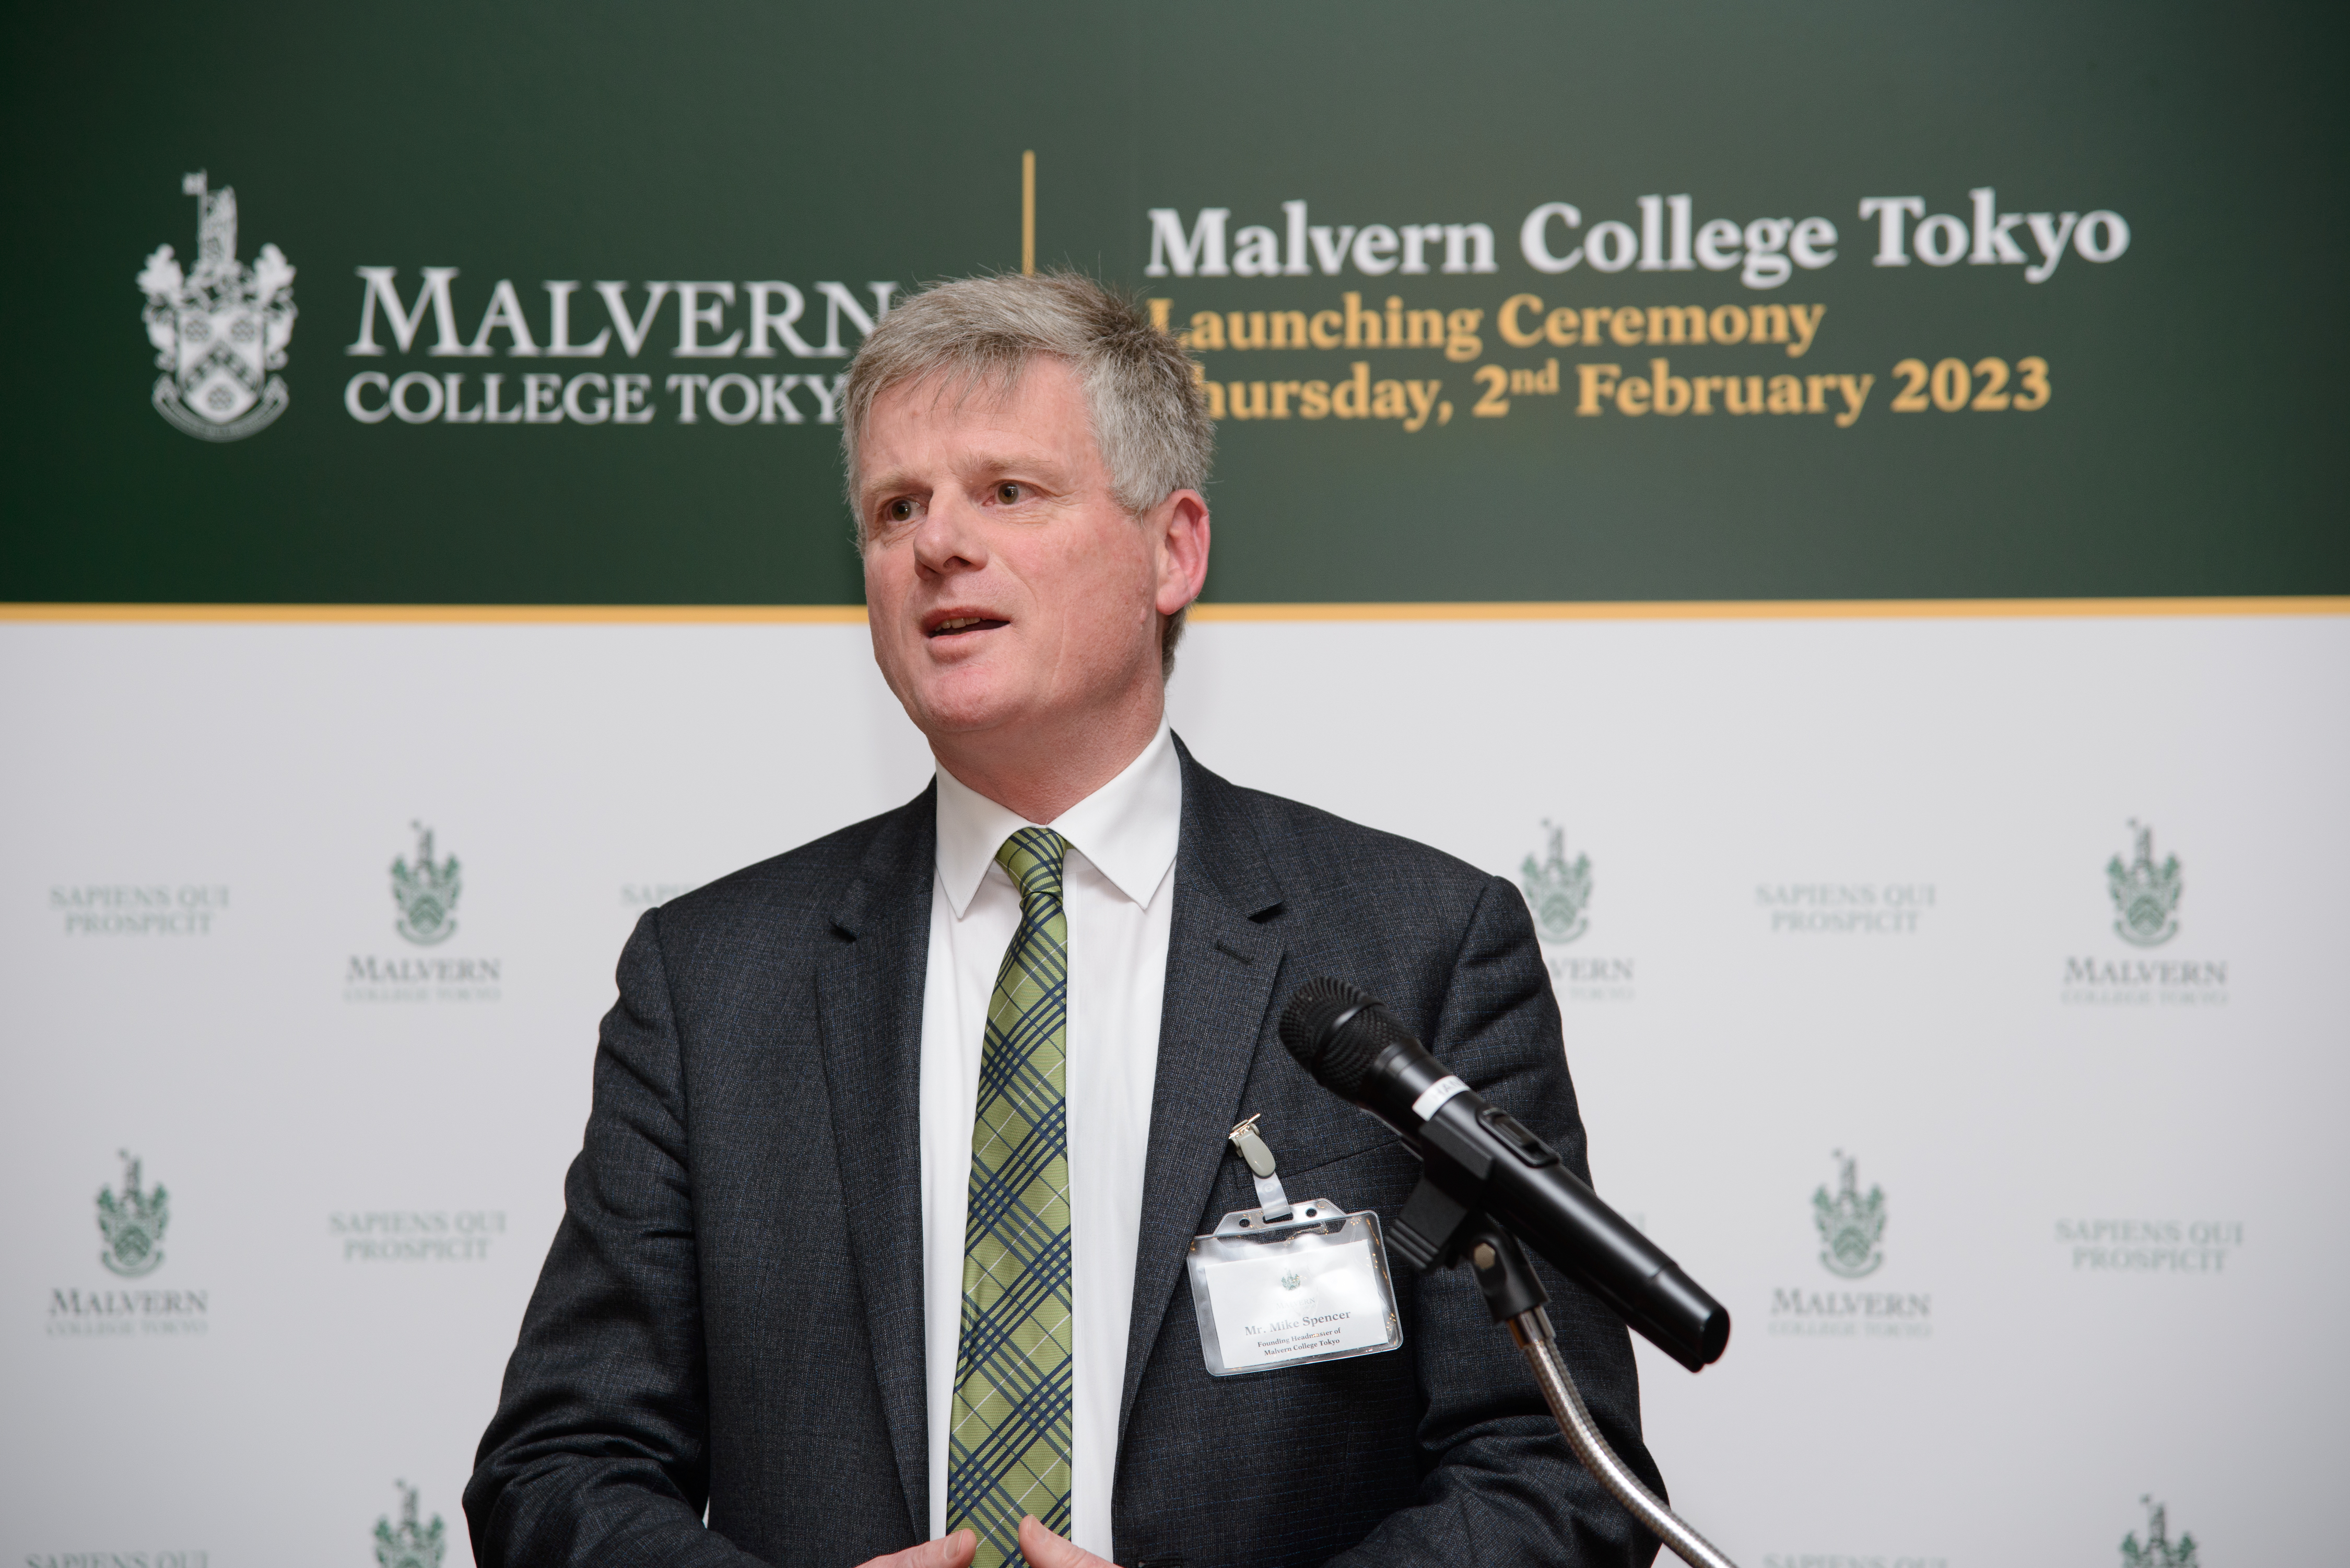 Mr. Mike Spencer Founding Headmaster of Malvern College Tokyo delivering his welcome speech in the launch ceremony